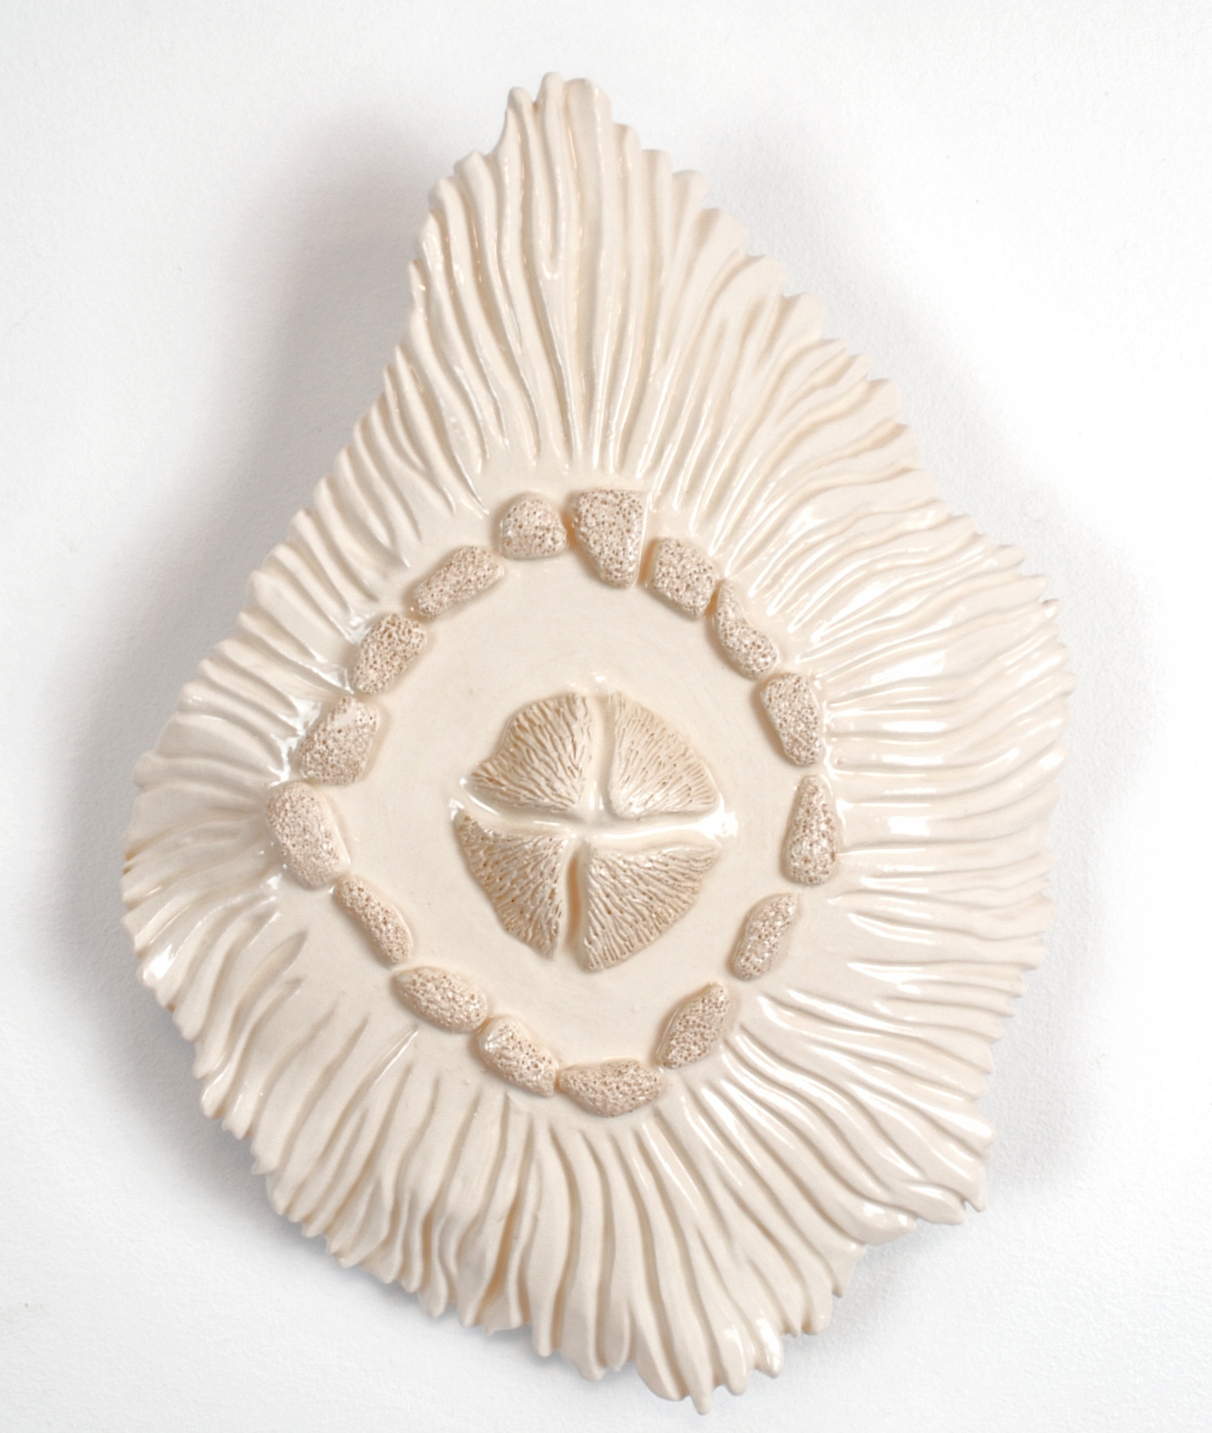 Detailed ceramic wall sculpture depicting the cellular structure of a Spanish Moss as seen through a micrograph, with an emphasis on organic forms, intricate patterns and textures. 